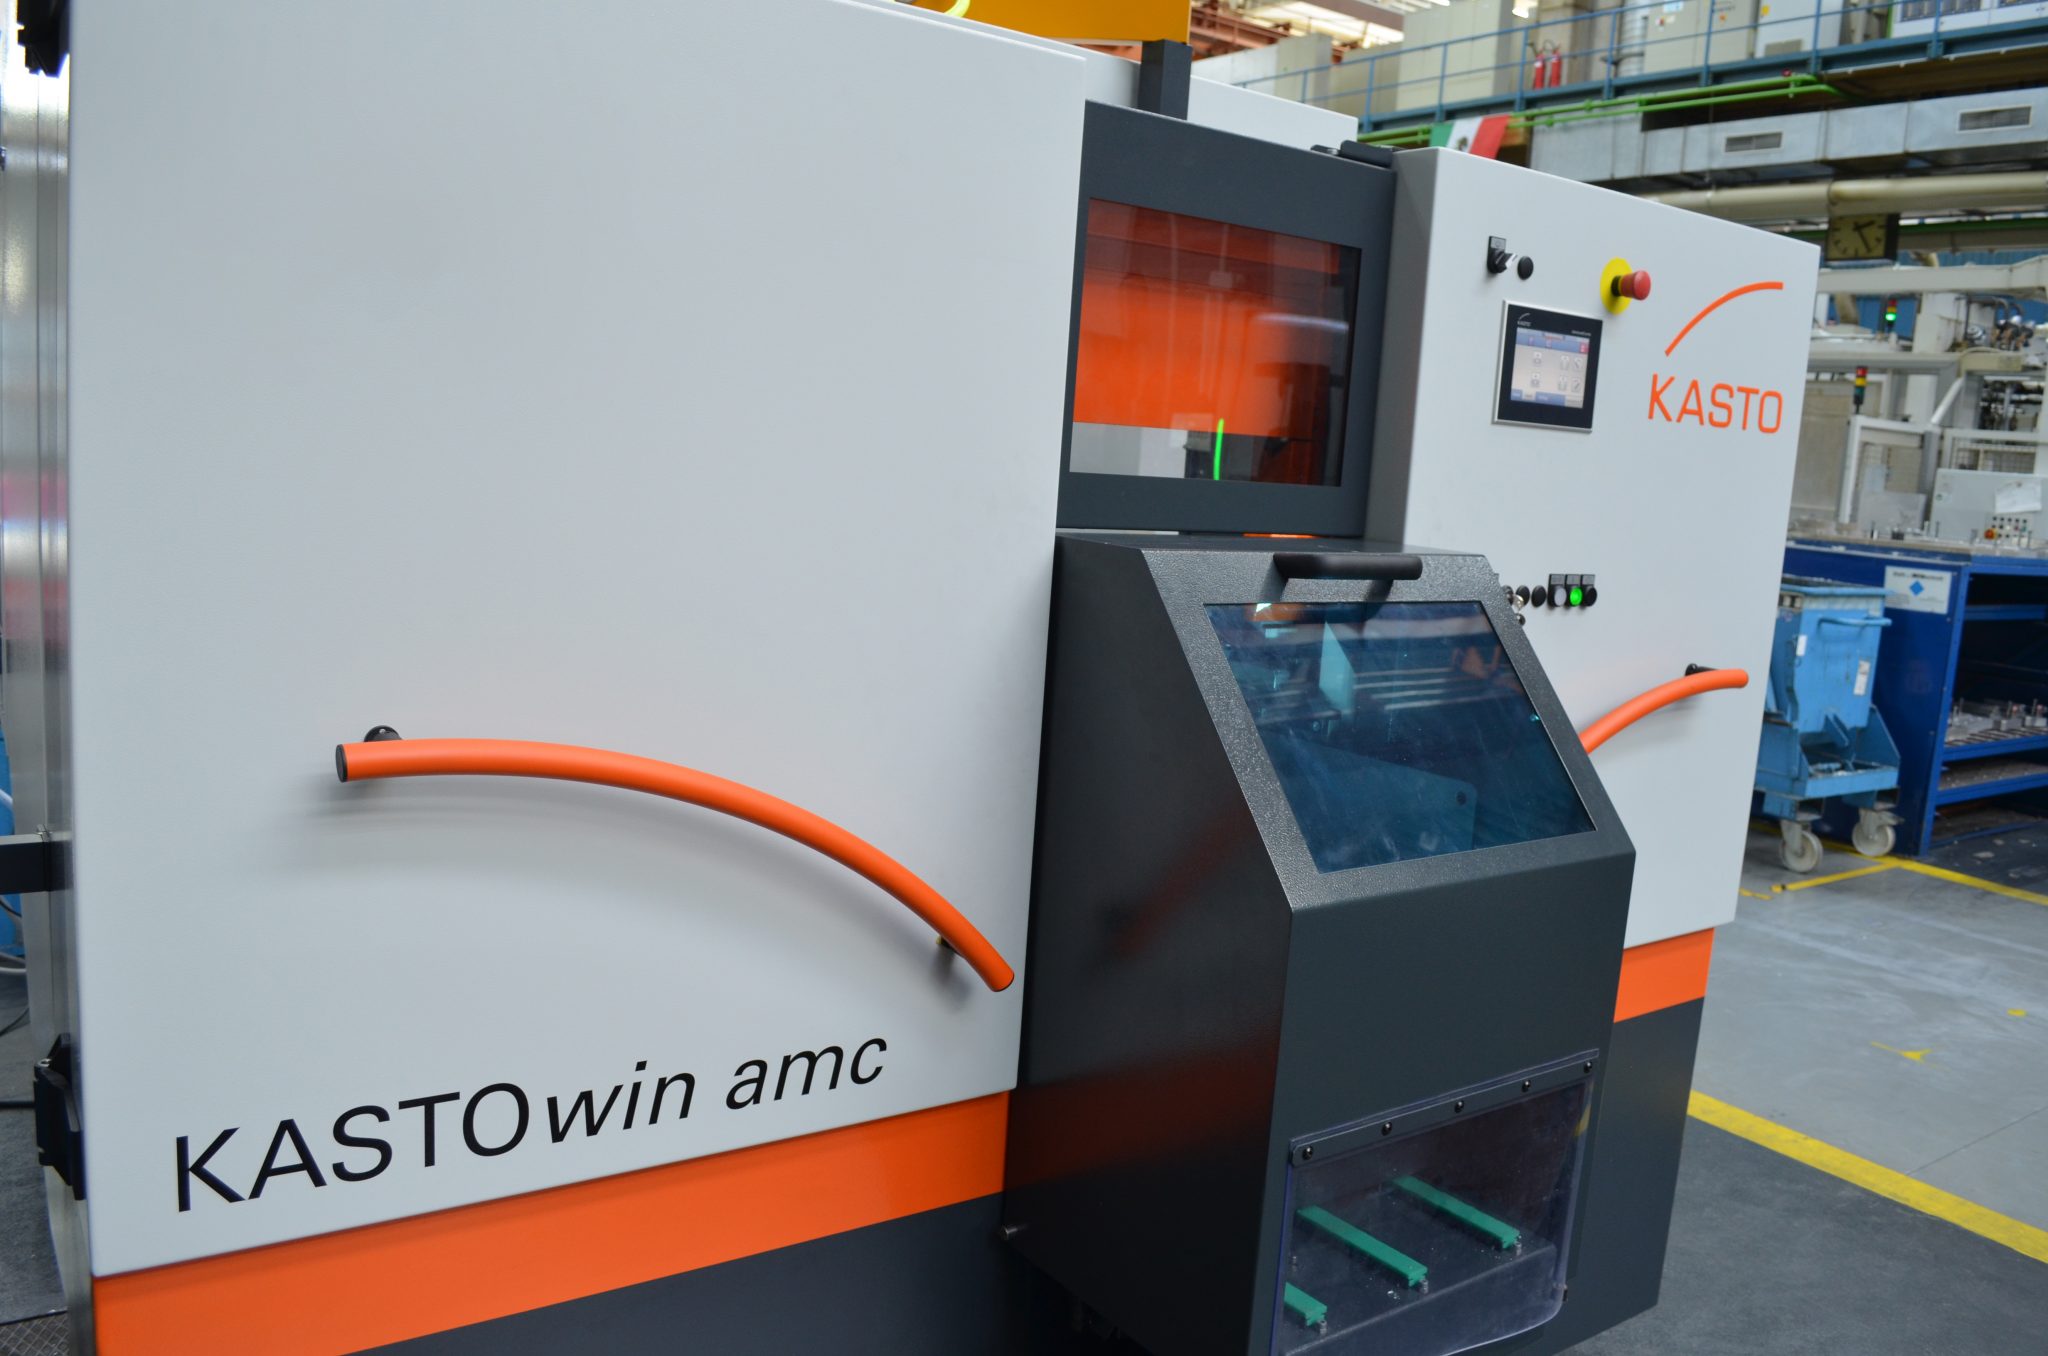 Airbus uses the KASTOwin amc to saw additively manufactured components